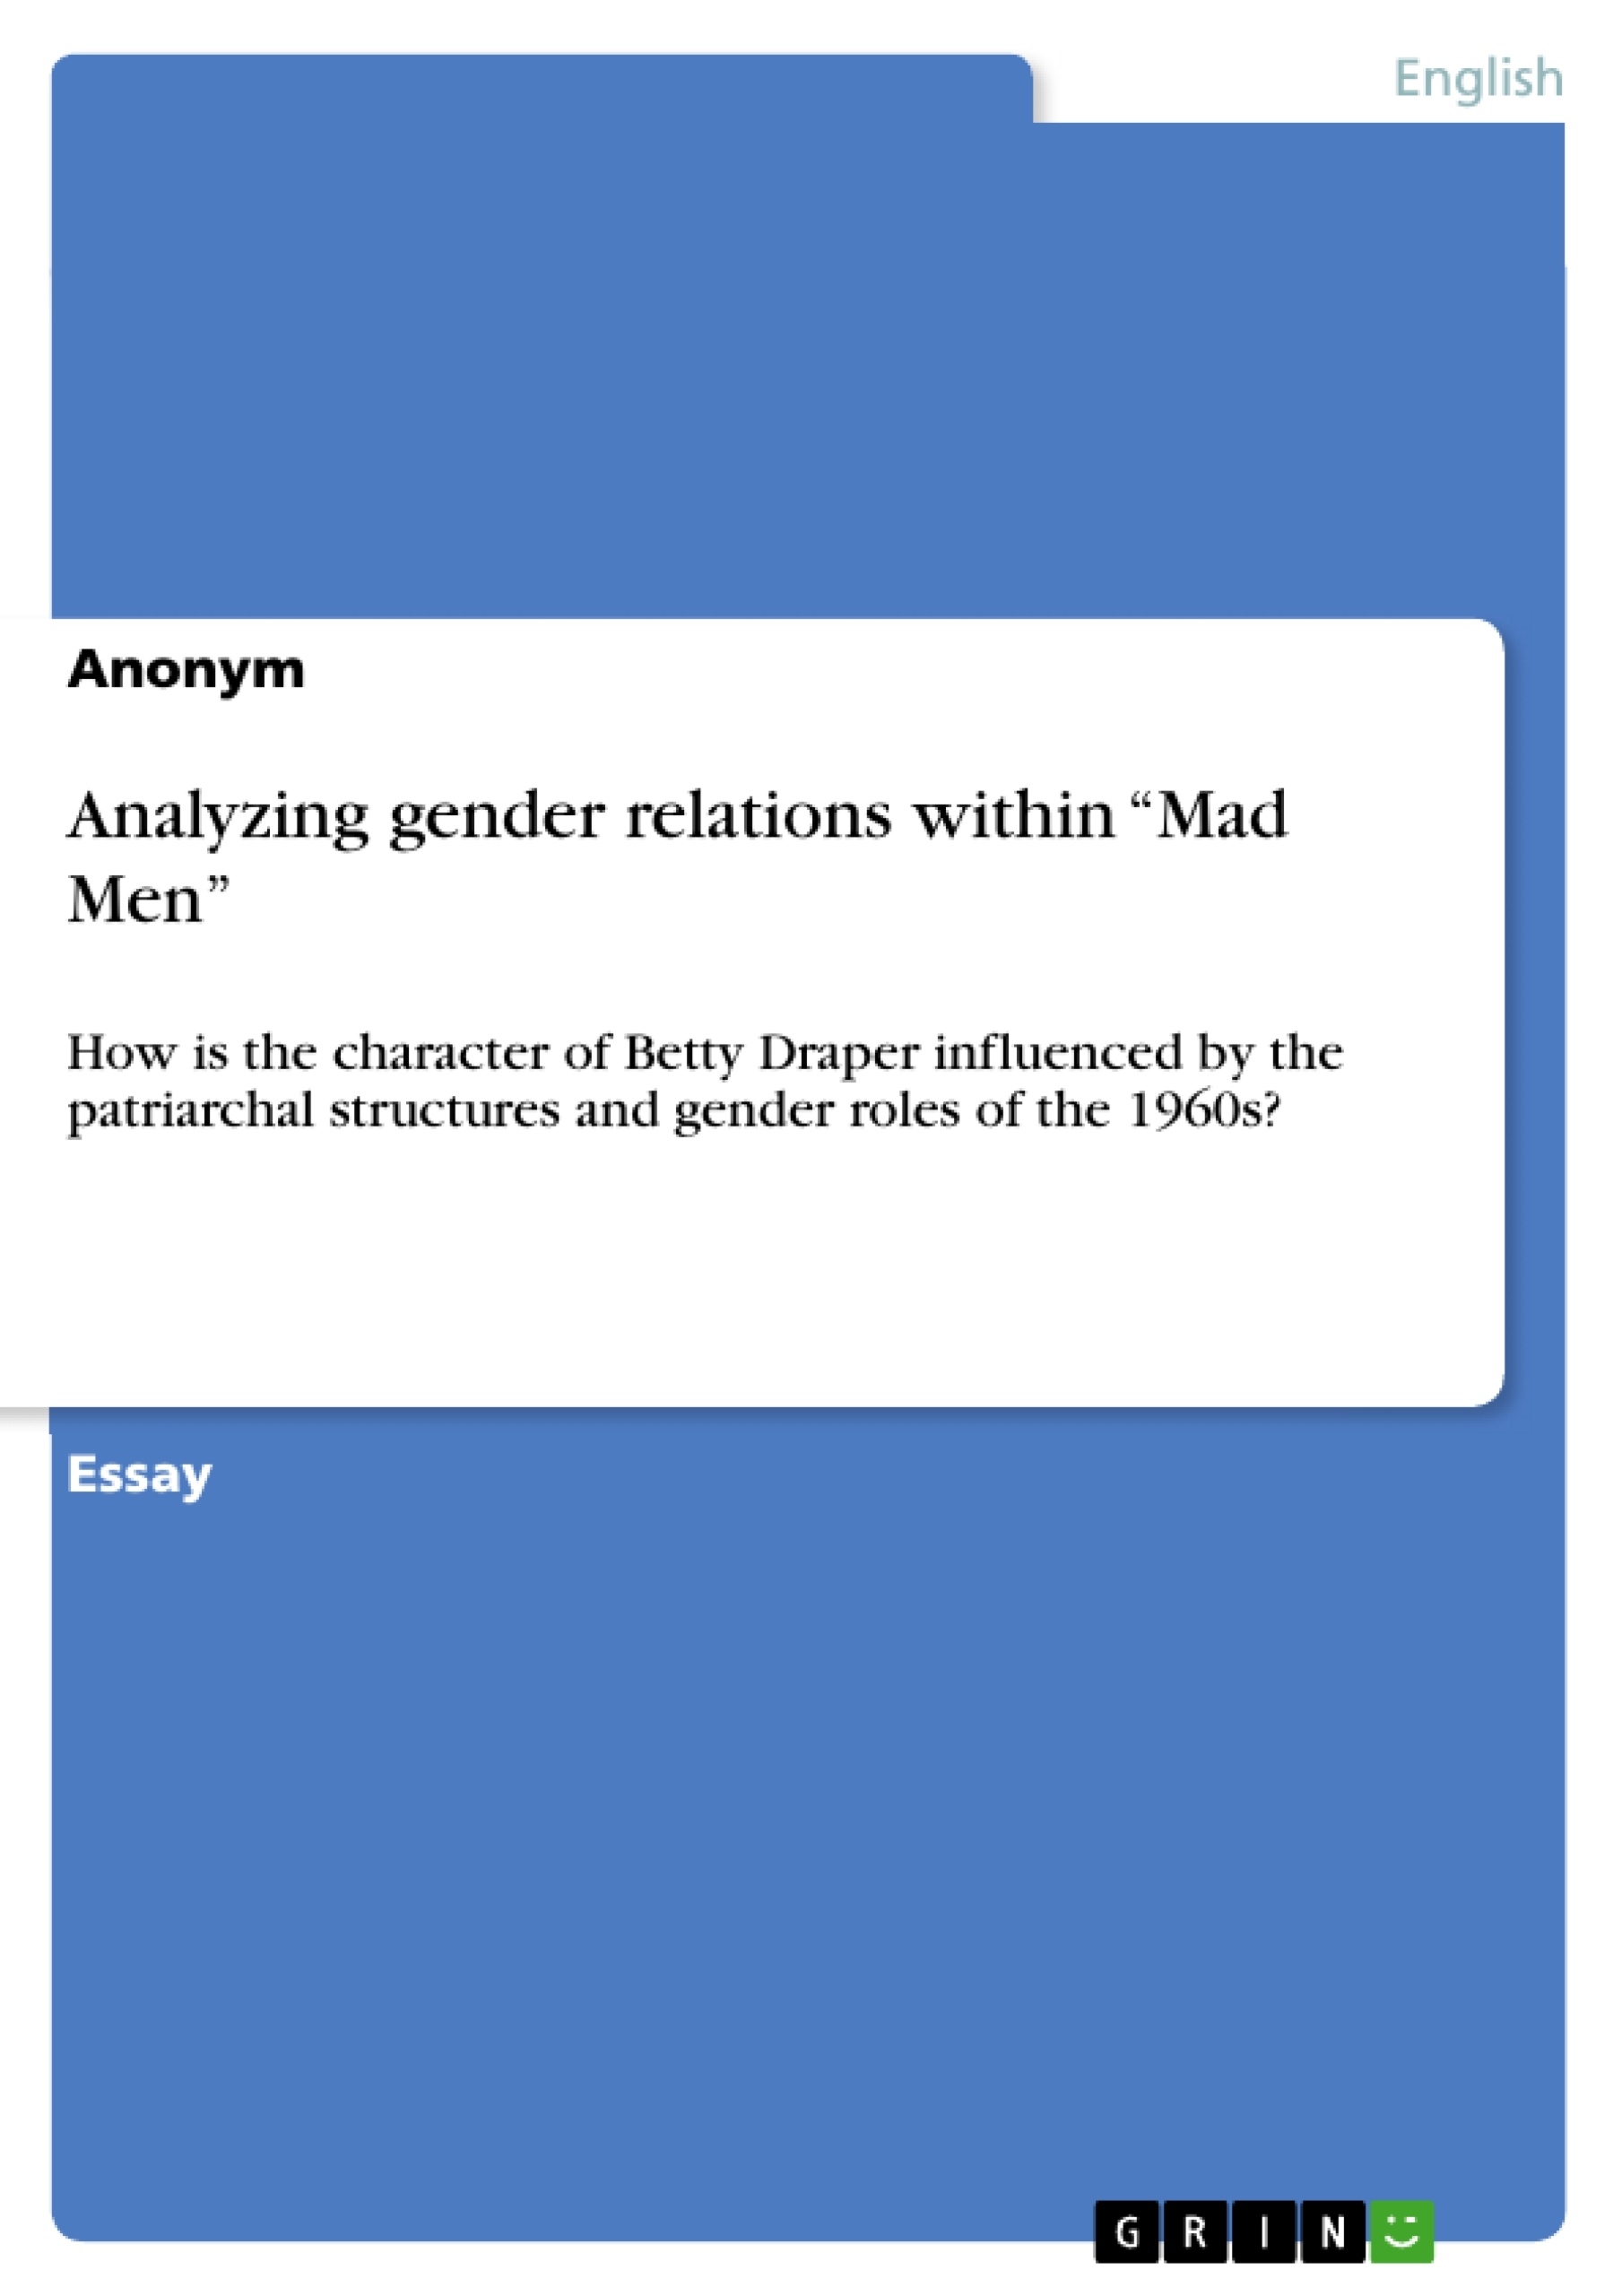 Titre: Analyzing gender relations within “Mad Men”